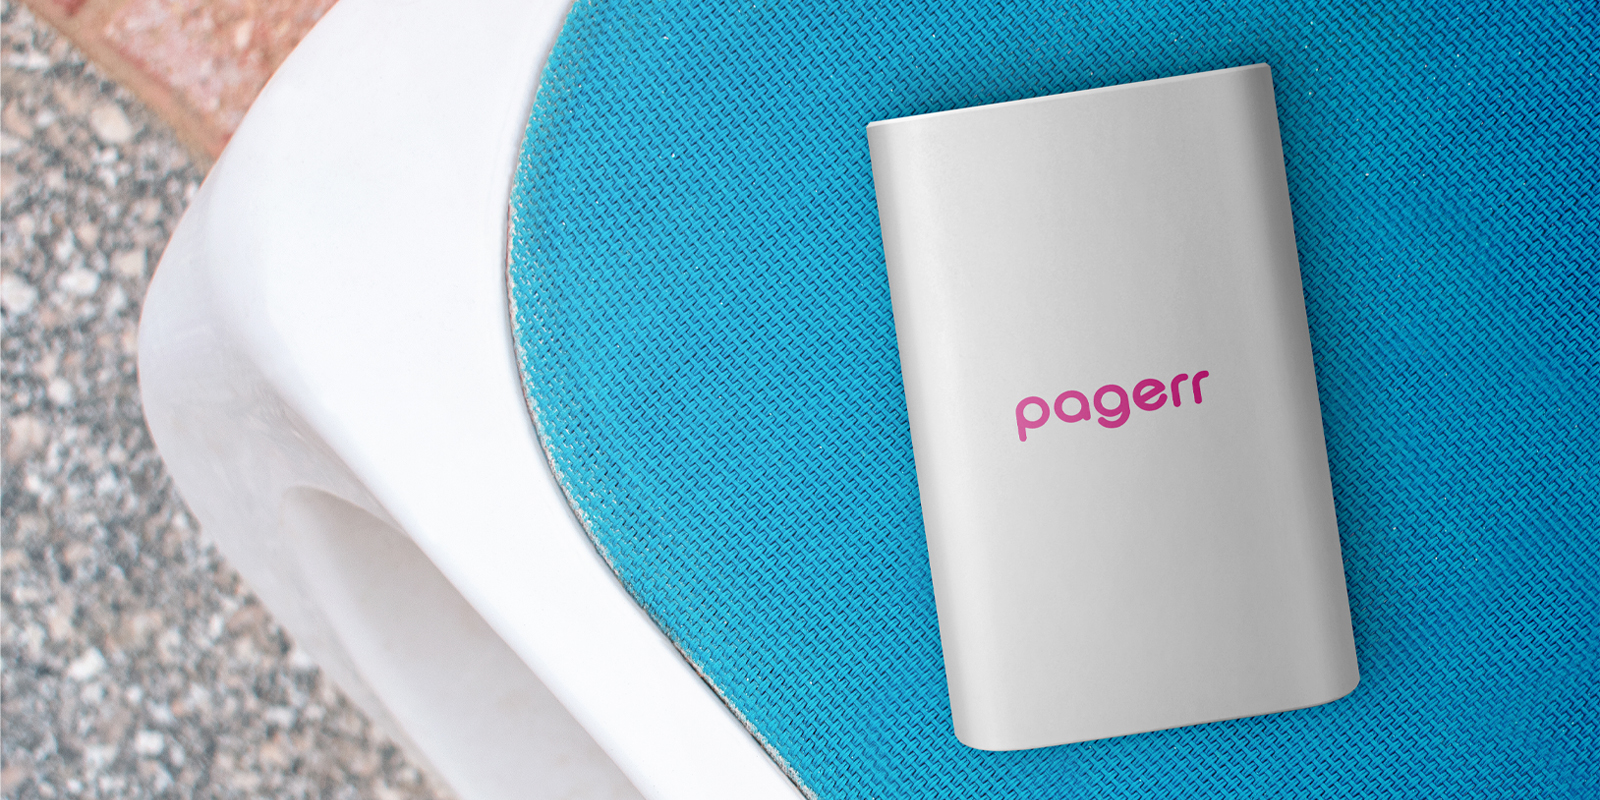 Chargers & power banks in Madrid - Print with Pagerr